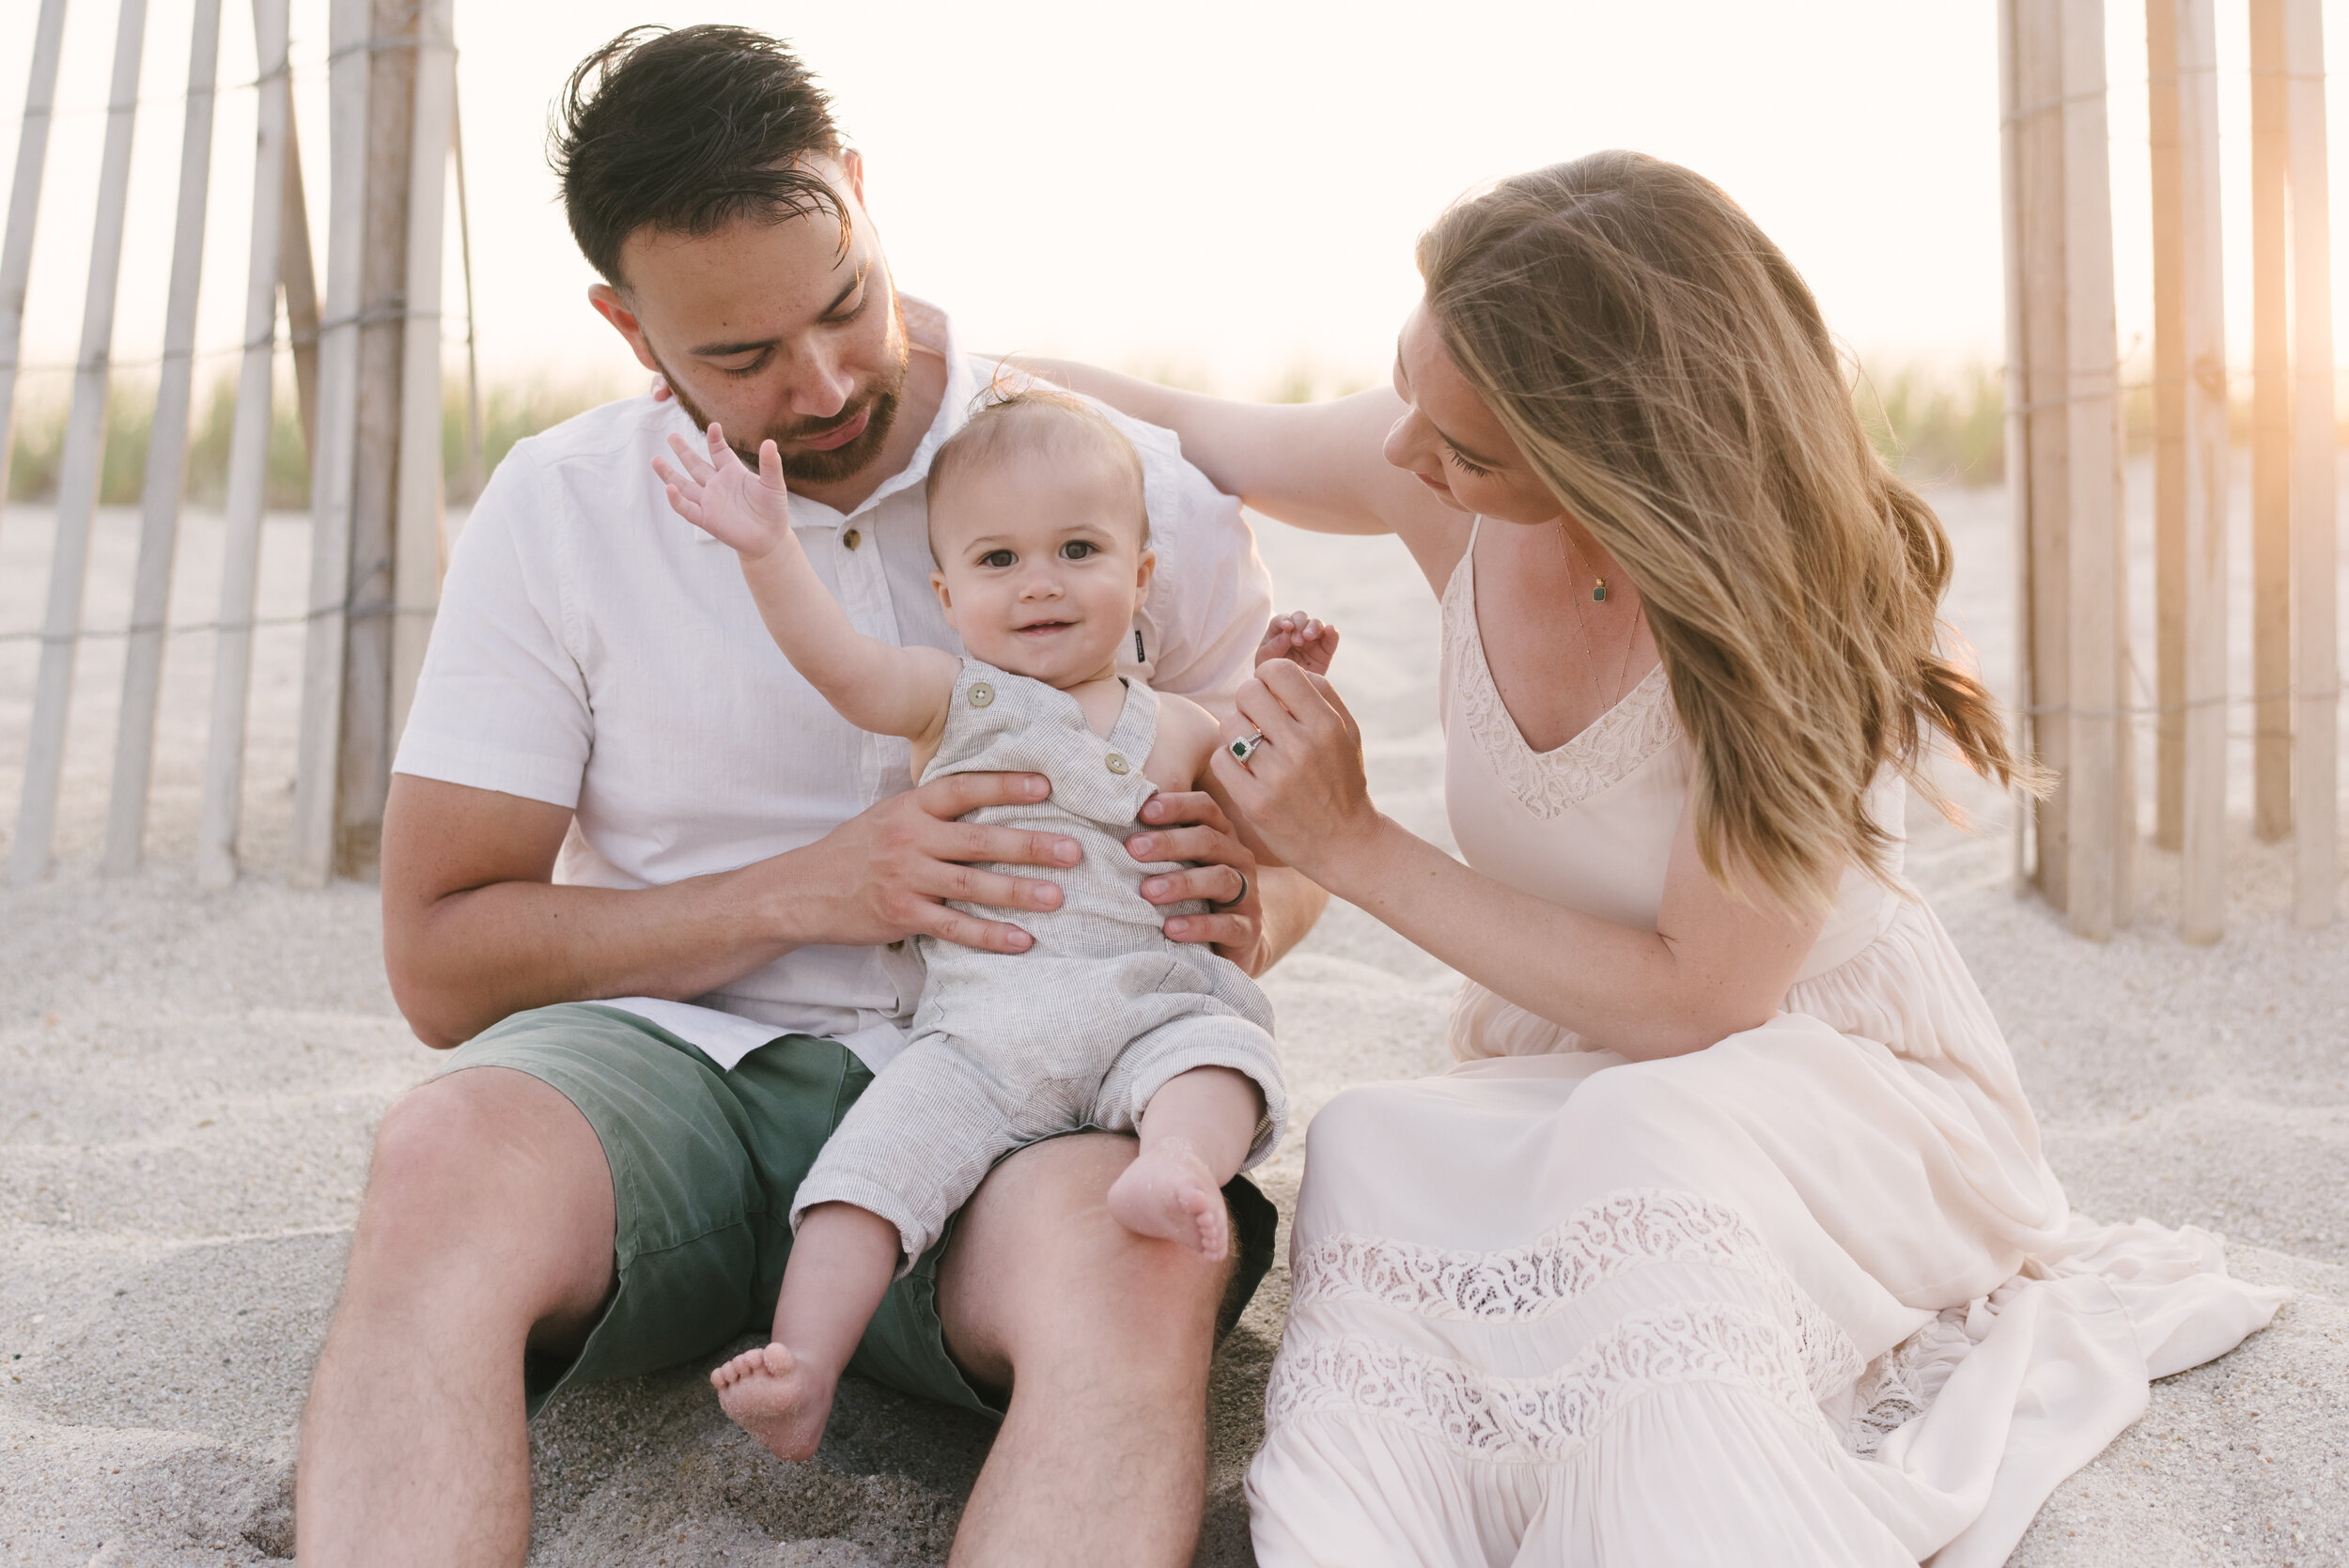 Beach photo ideas: Mom, dad, and baby in neutral colors on beach for family photos | NKB Photo